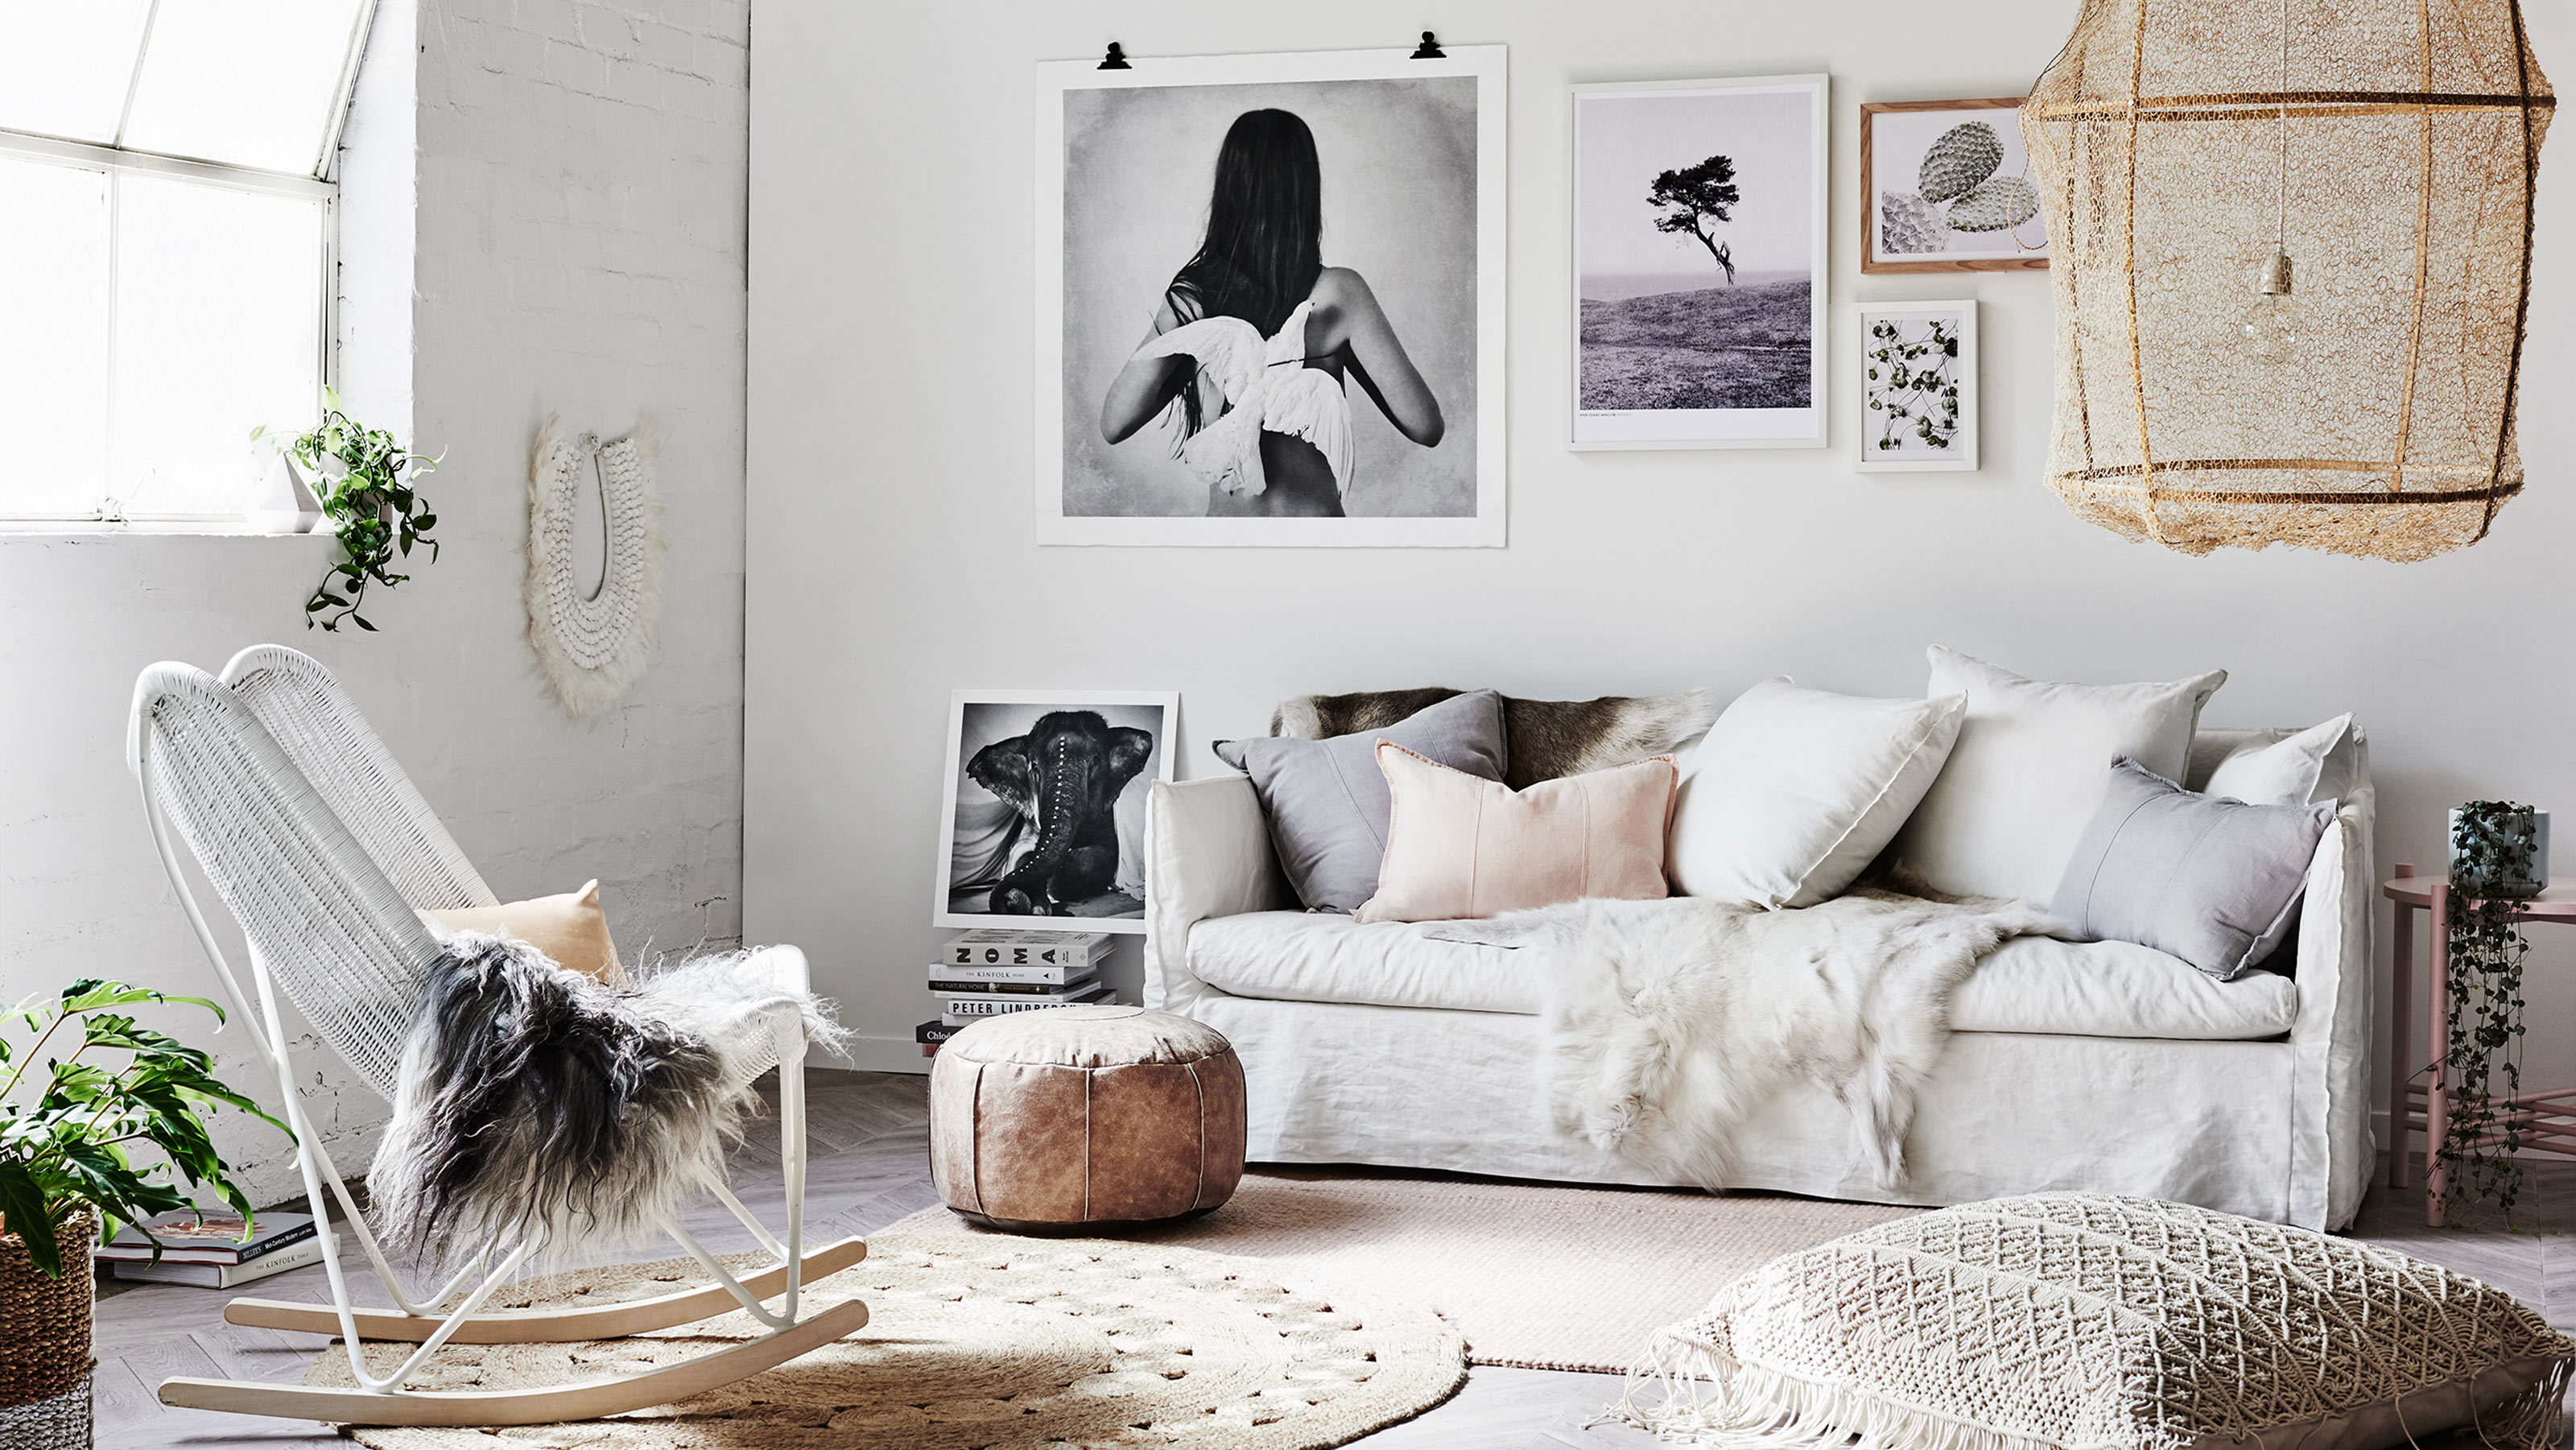 Global-Inspired Finds Play Up A Modern Boho Vibe - Luxe Interiors + Design